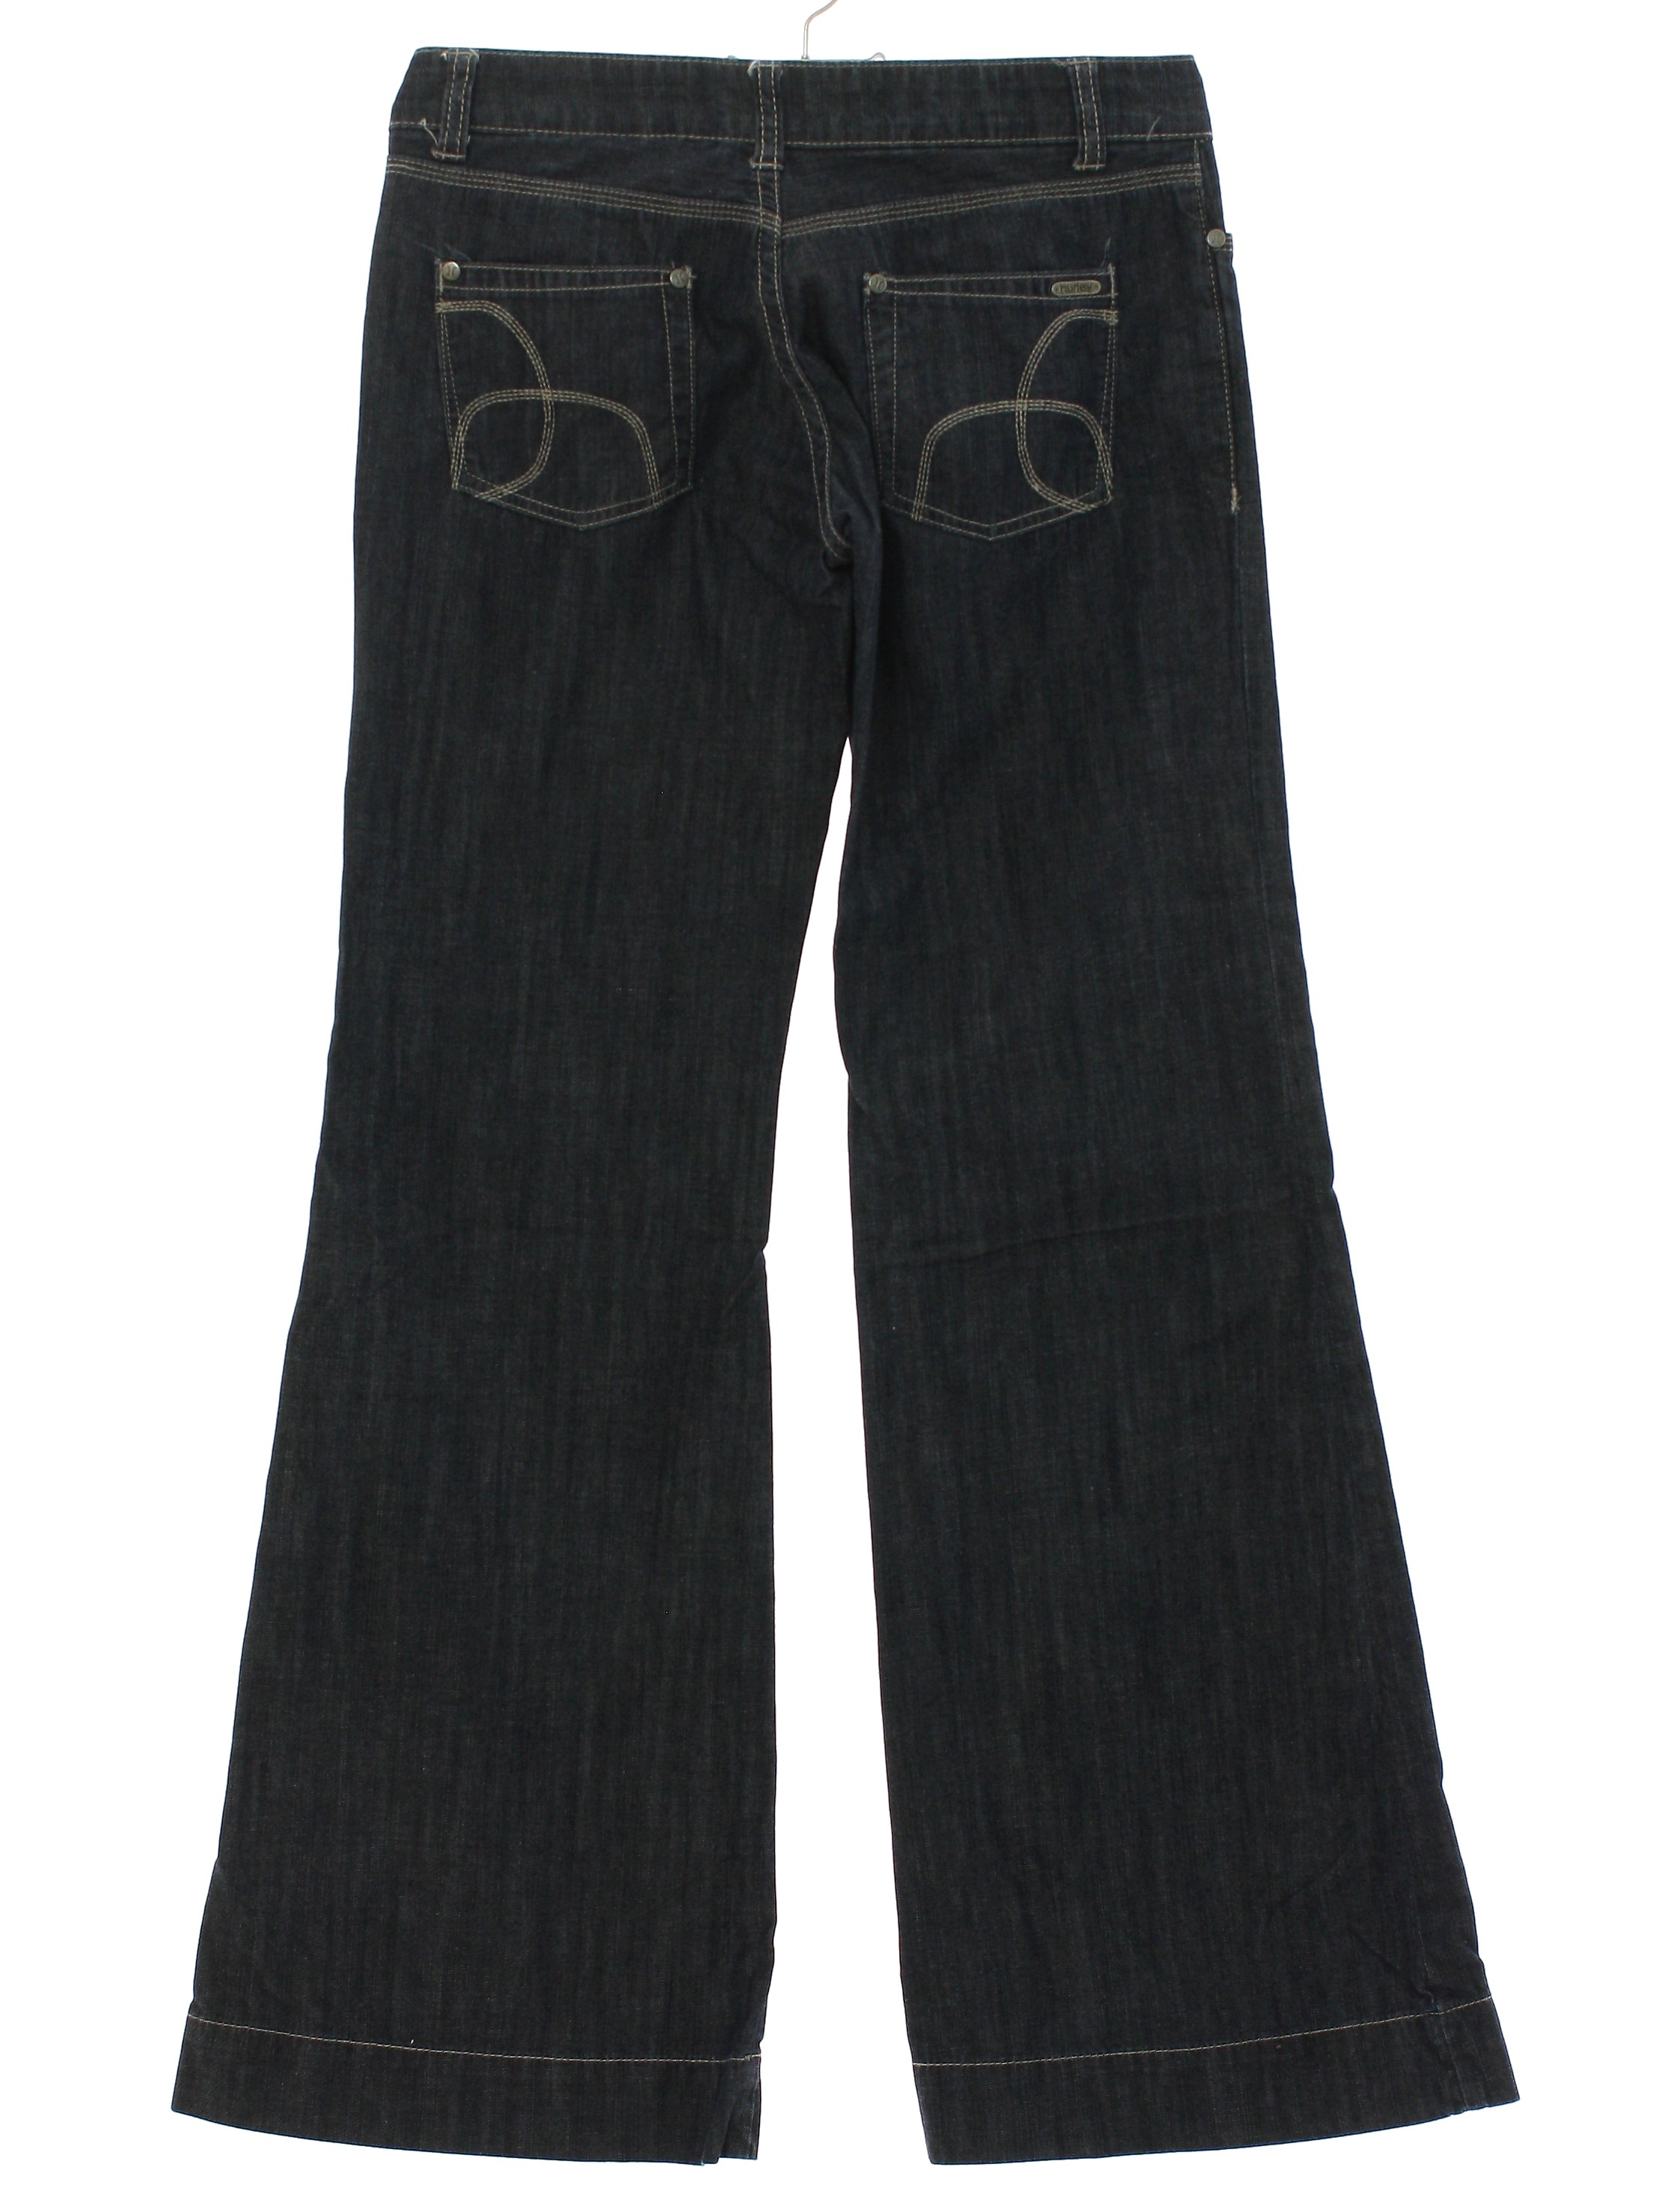 debat exegese Technologie Flared Pants / Flares: 90s (Y2k Early 2000s) -Hurley- Womens dark blue wash  cotton denim flared lowrise denim jeans pants with zipper fly closure with  button. Five pocket style - front scoop